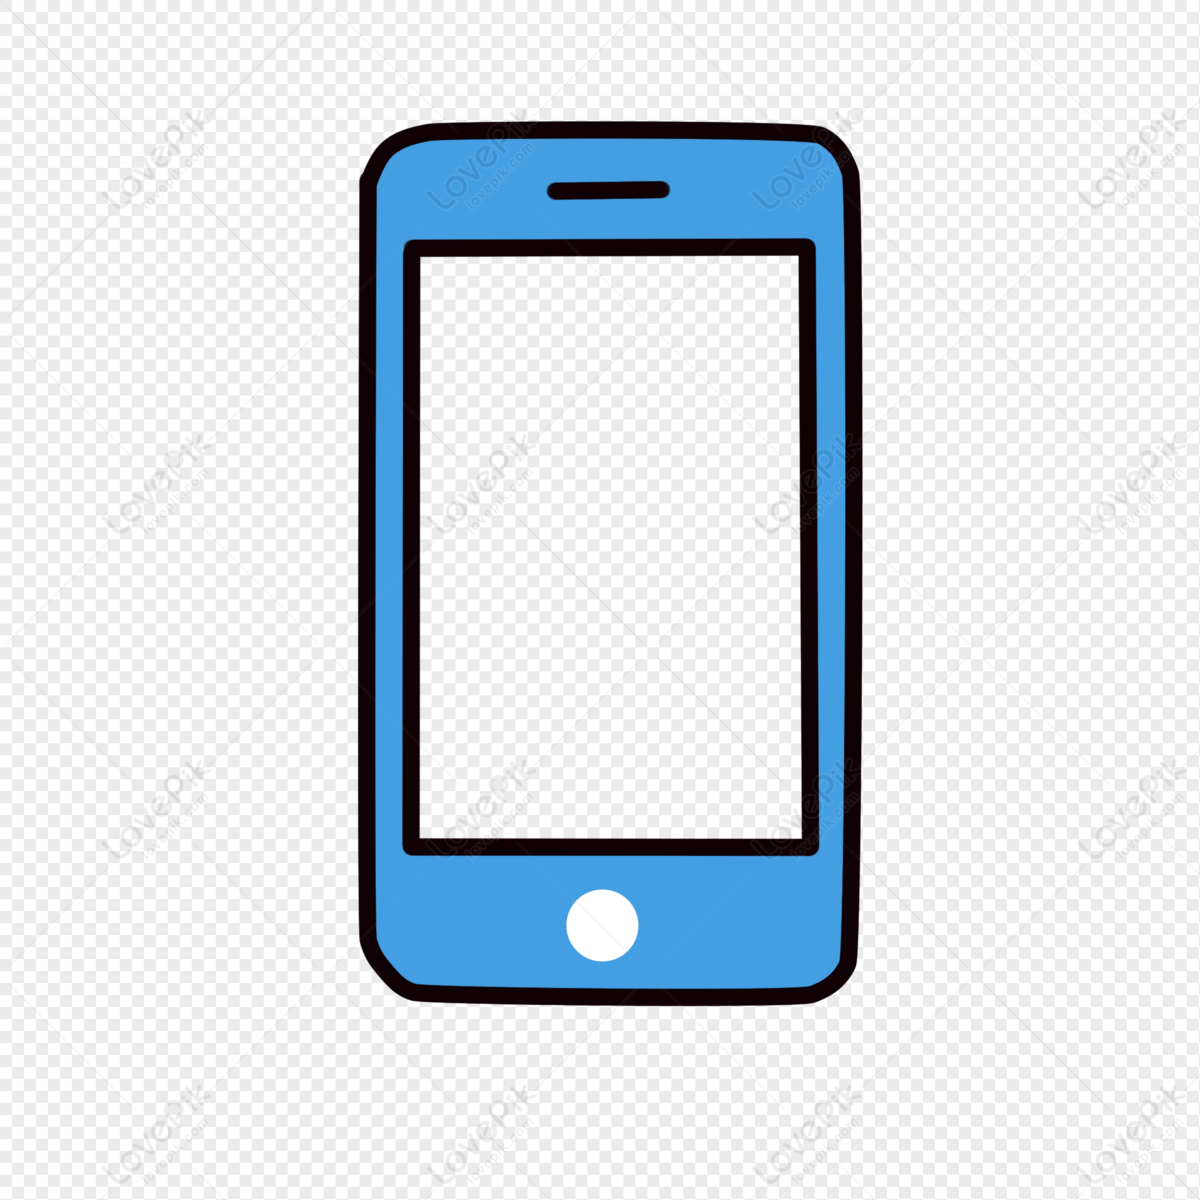 Mobile phone icon, cell phone icon, phone icon, icon png hd transparent image